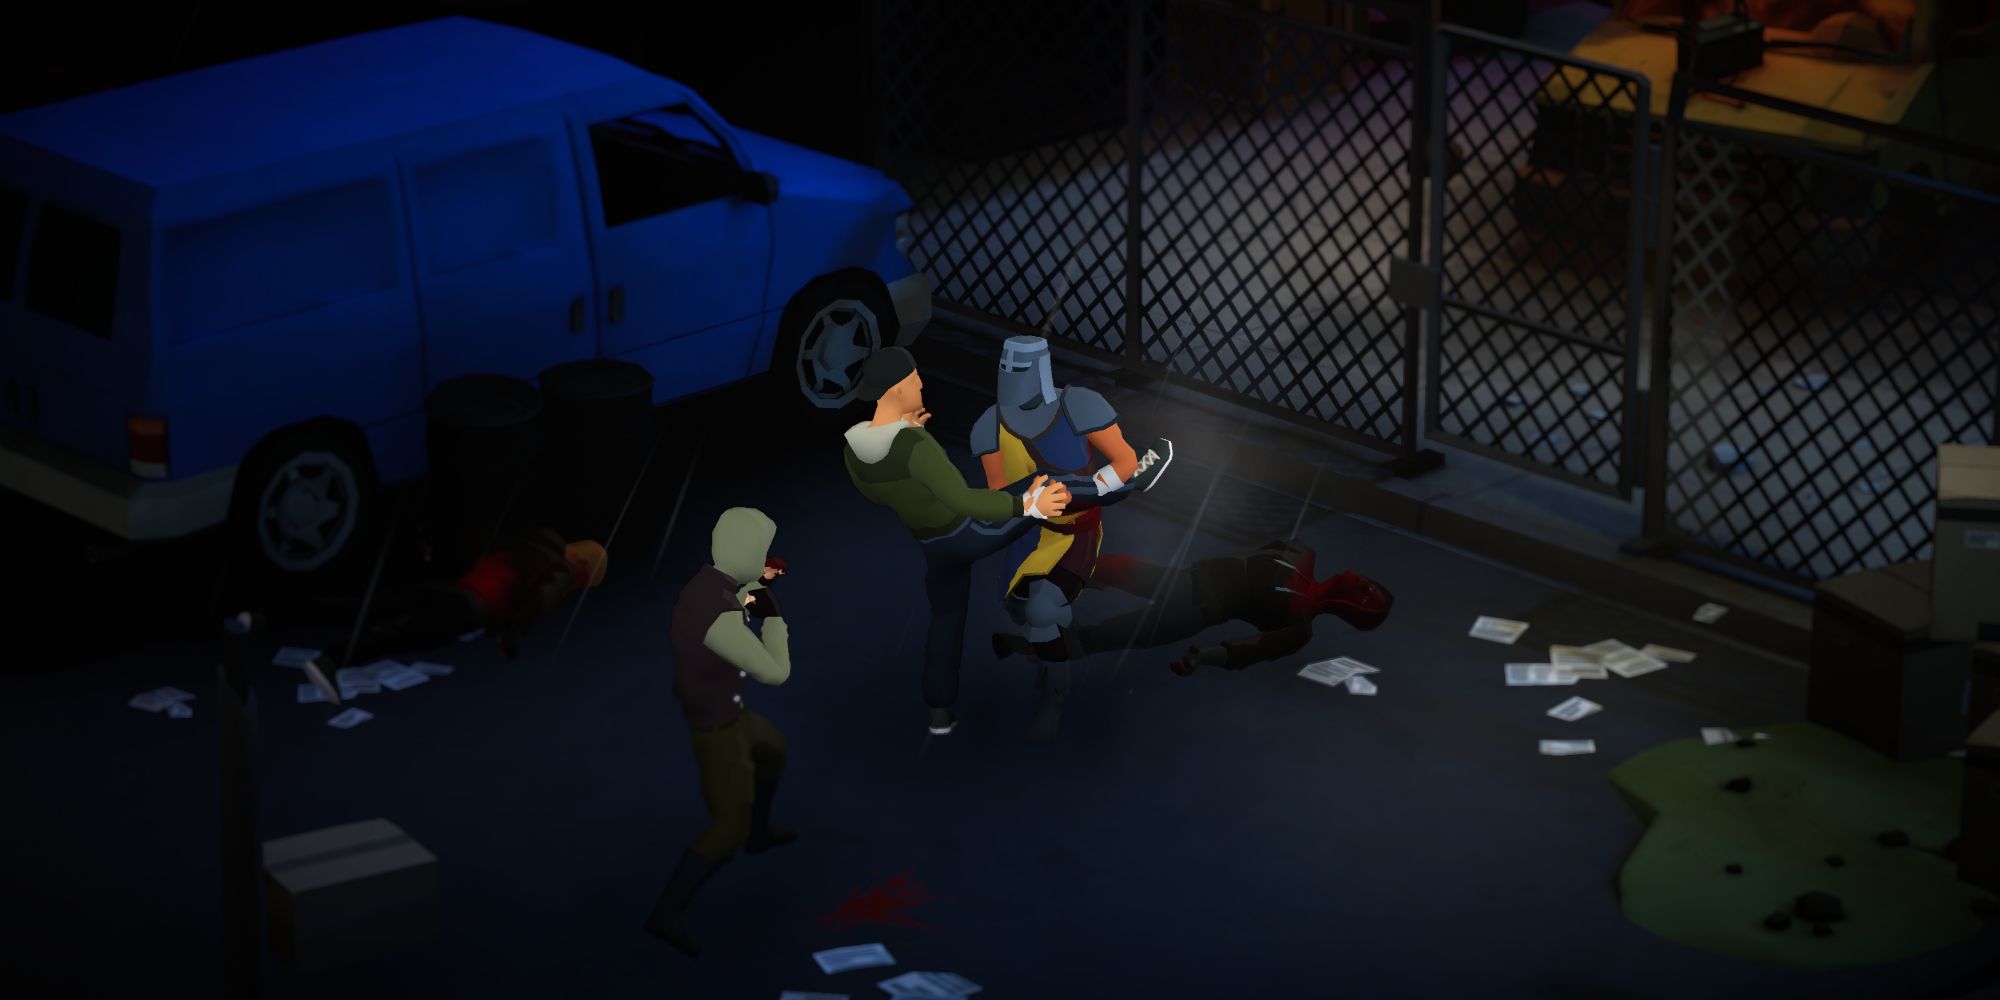 A Knight Grabbing an enemy in Midnight Fight Express